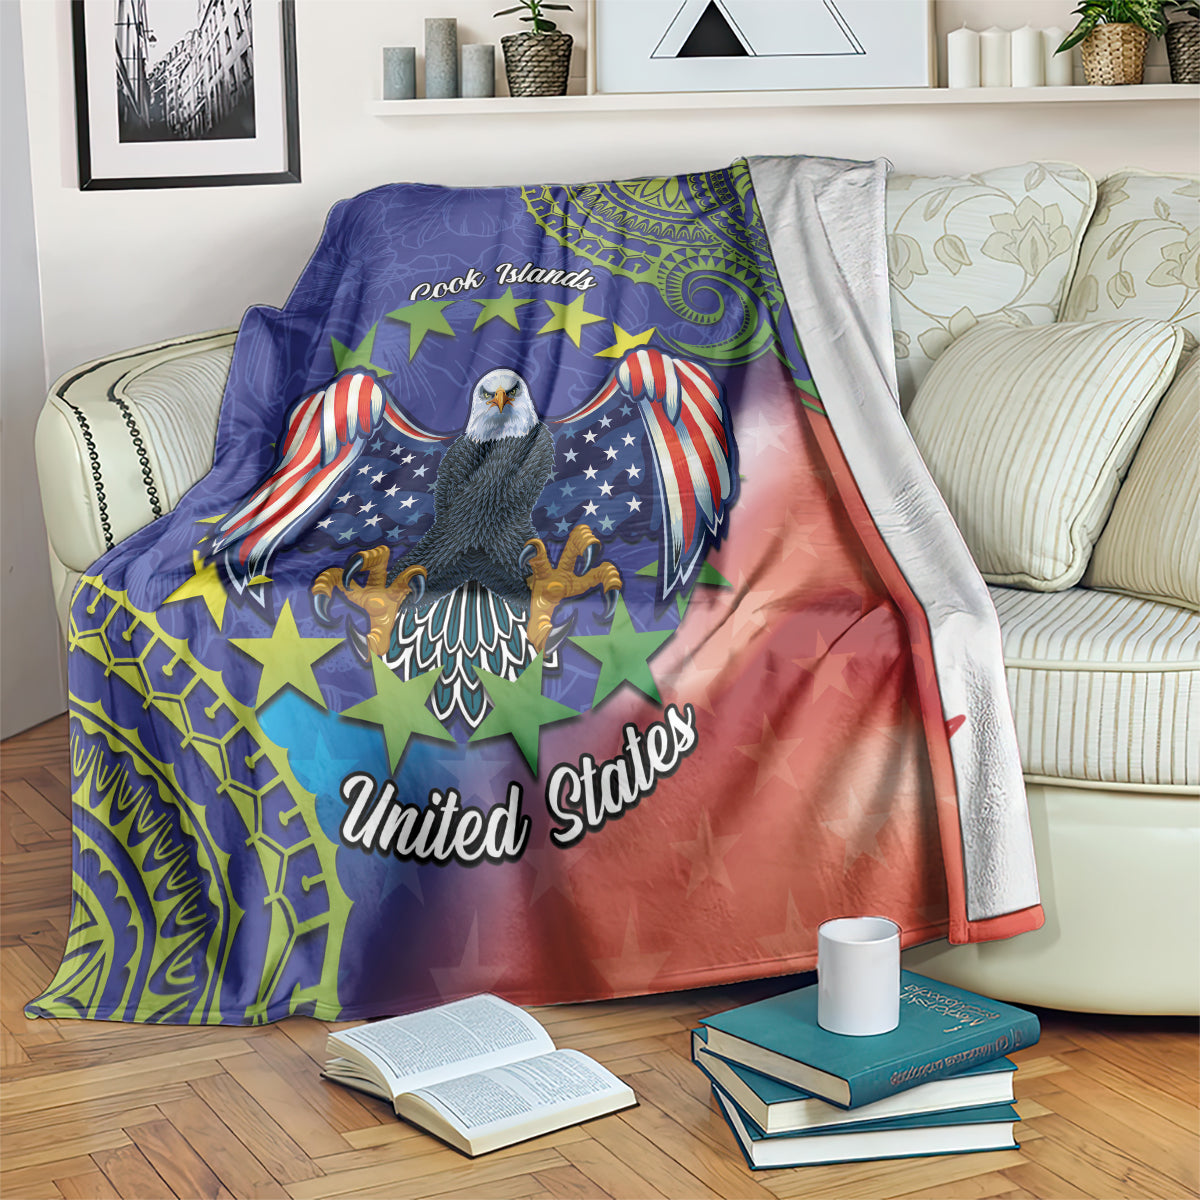 Personalised United States And Cook Islands Blanket USA Eagle Mix Polynesian Pattern